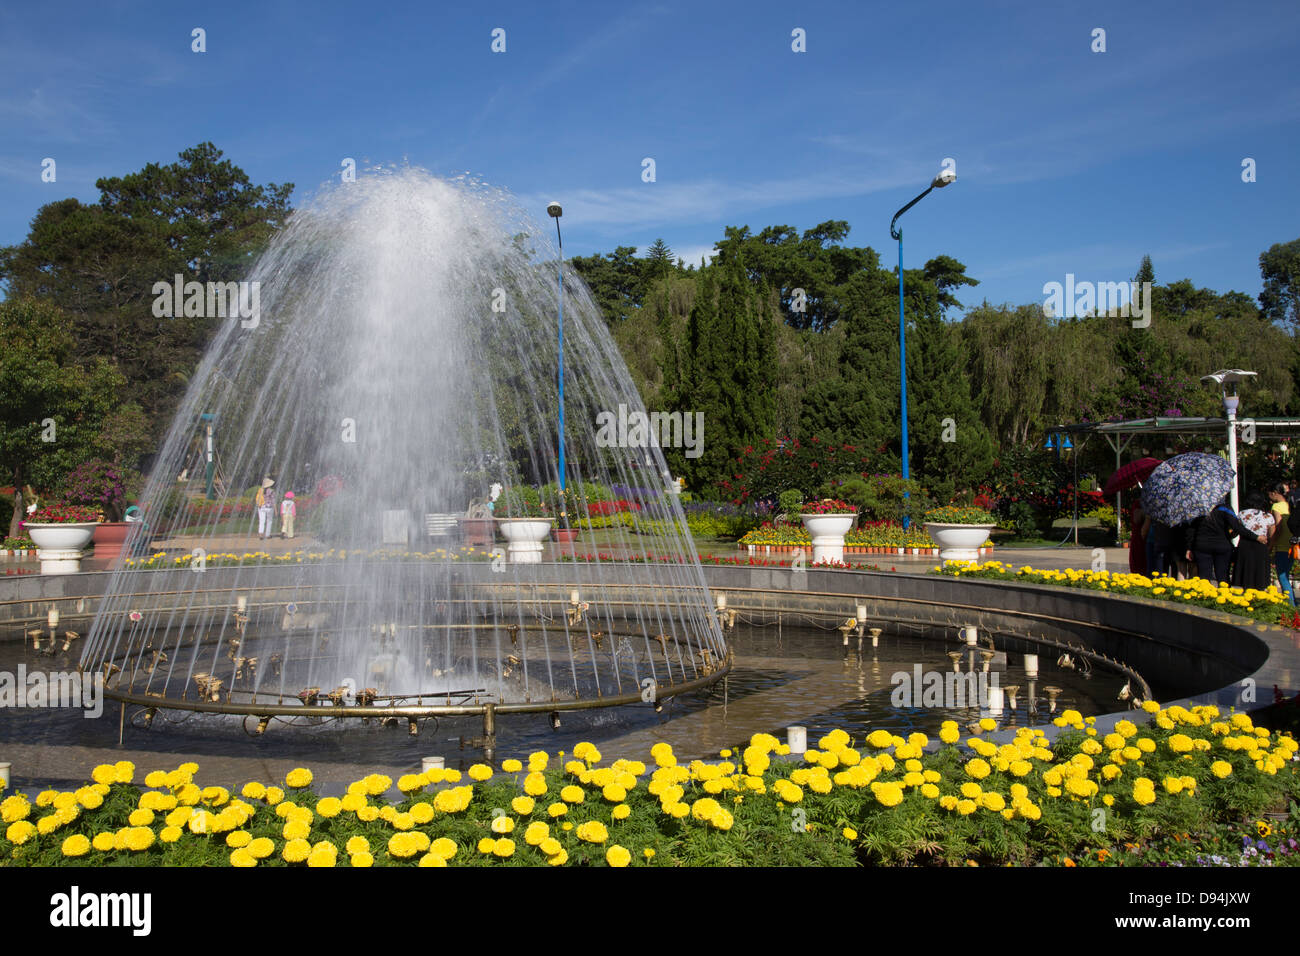 Dalat Flower Gardens were established in 1966 as Dalat is an excellent place for flowers and plants to thrive. Stock Photo